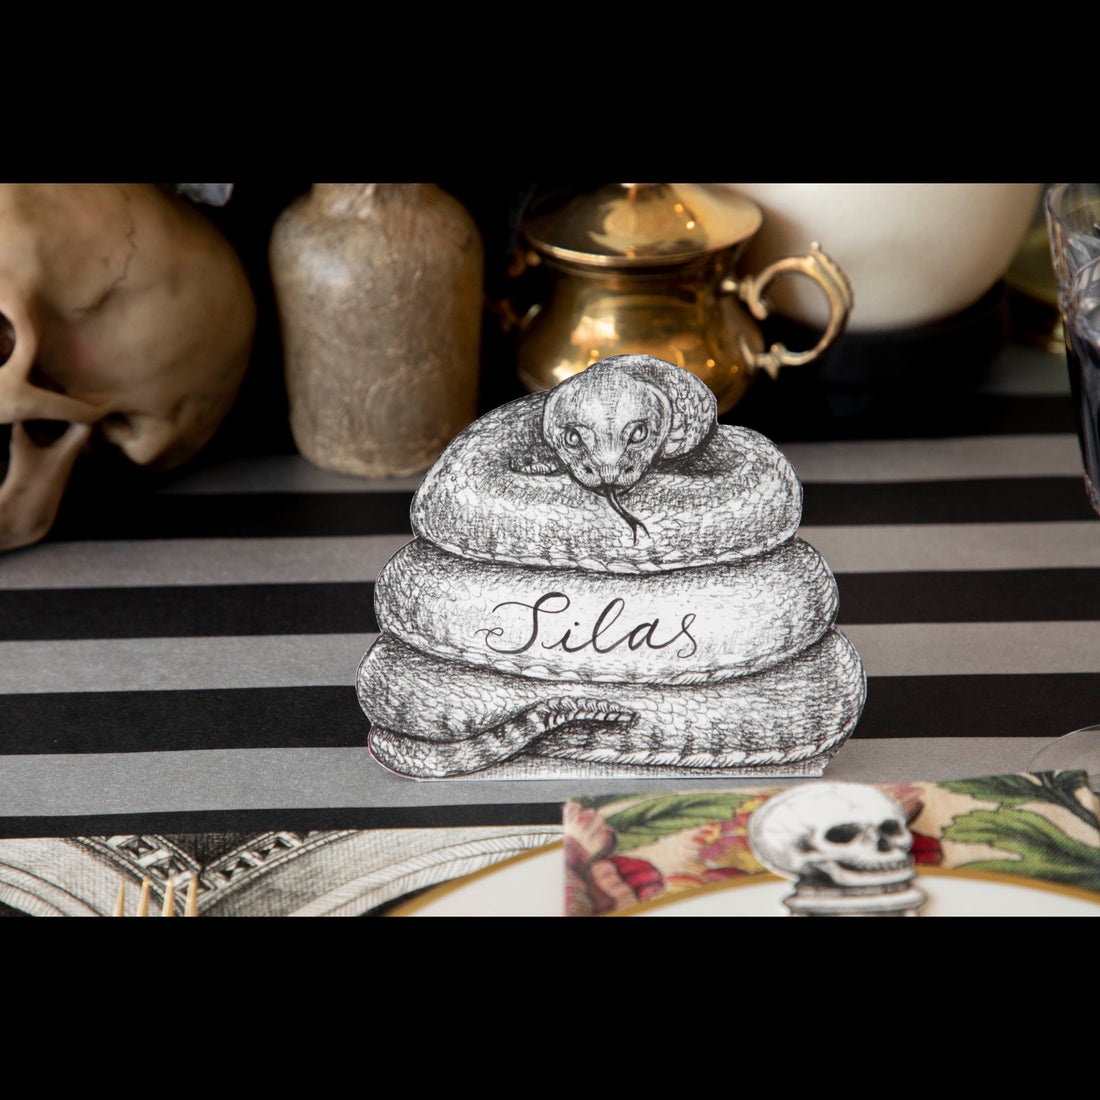 A Coiled Snake Place Card reading &quot;Silas&quot; standing on a spooky Halloween-themed tablescape.